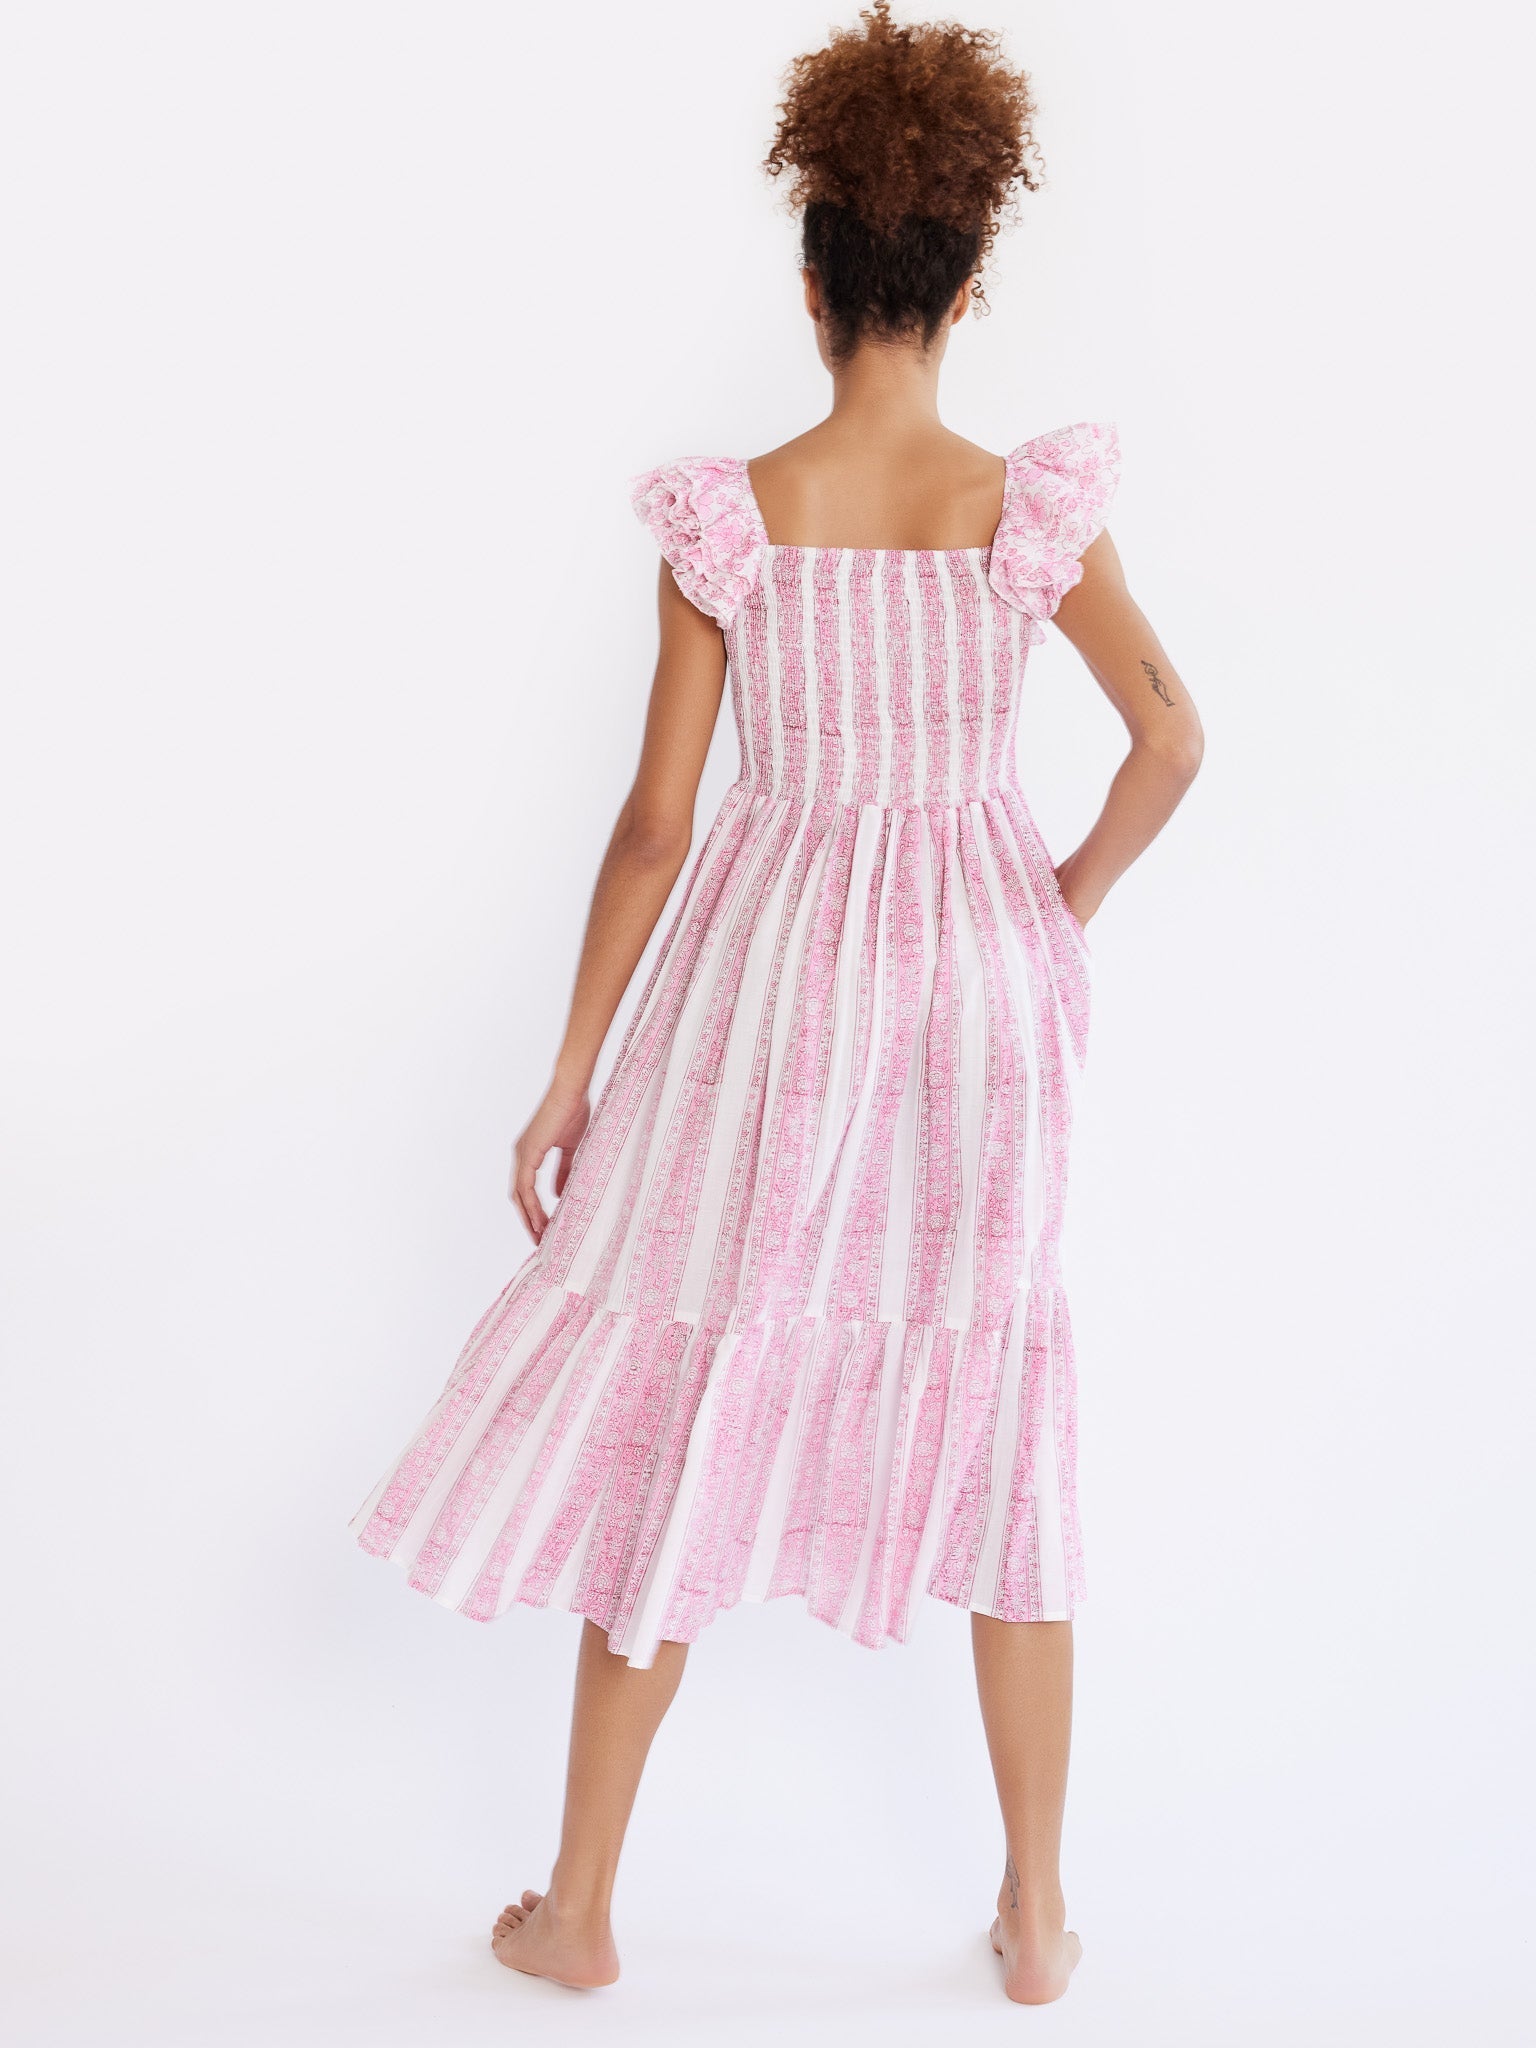 MILLE Clothing Olympia Dress in Jaipur Stripe